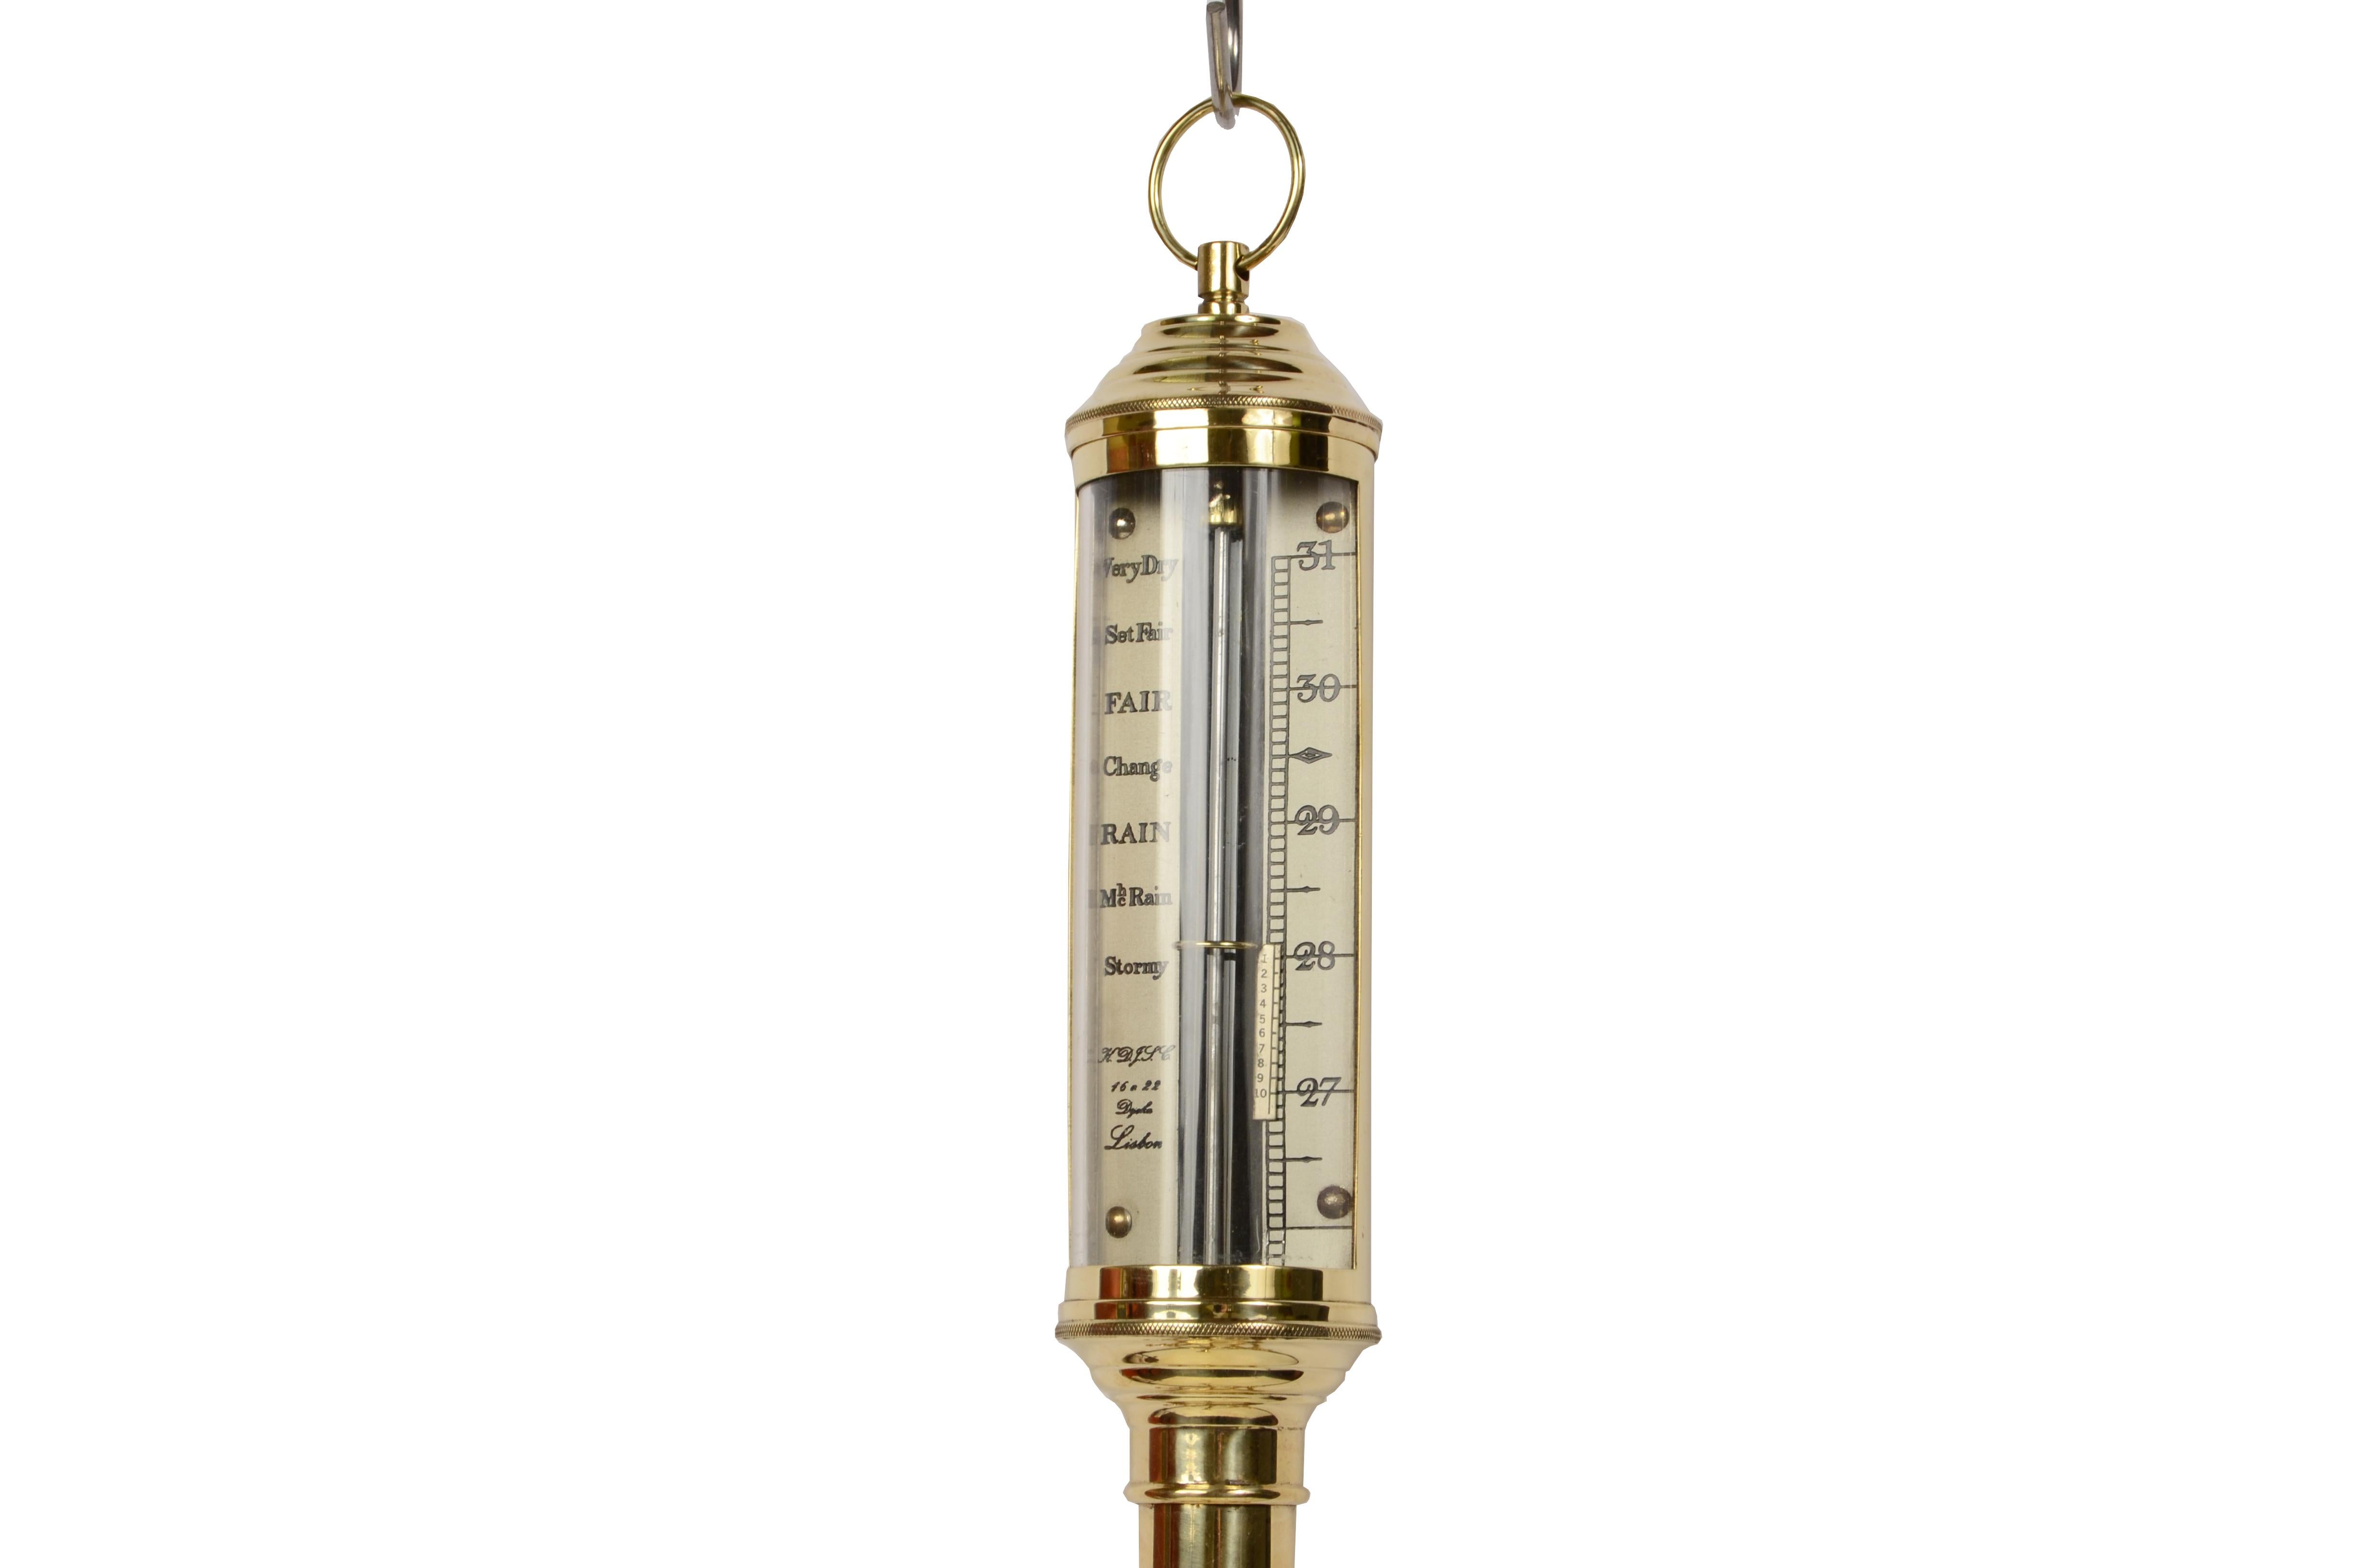 Mid-20th Century 1950s Nautical Brass Barometer Signed H.D.F.S.C. Mounted on Universal Joint